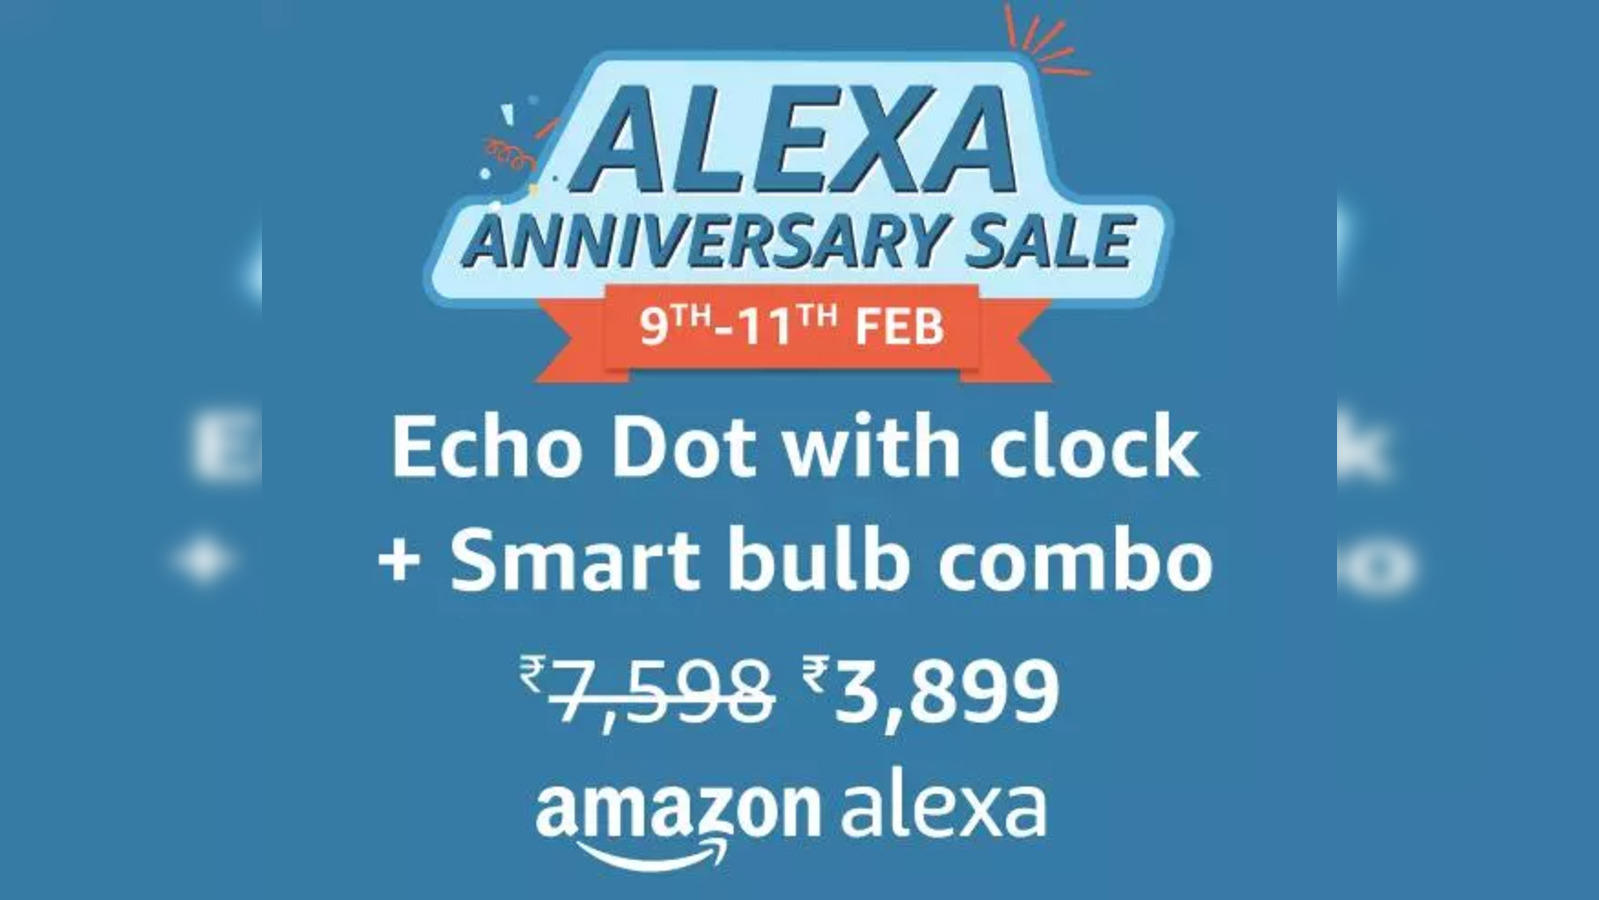 Alexa Anniversary  Sale 2024 - Echo Dot with clock + Smart bulb combo  for only Rs.3,899 - The Economic Times